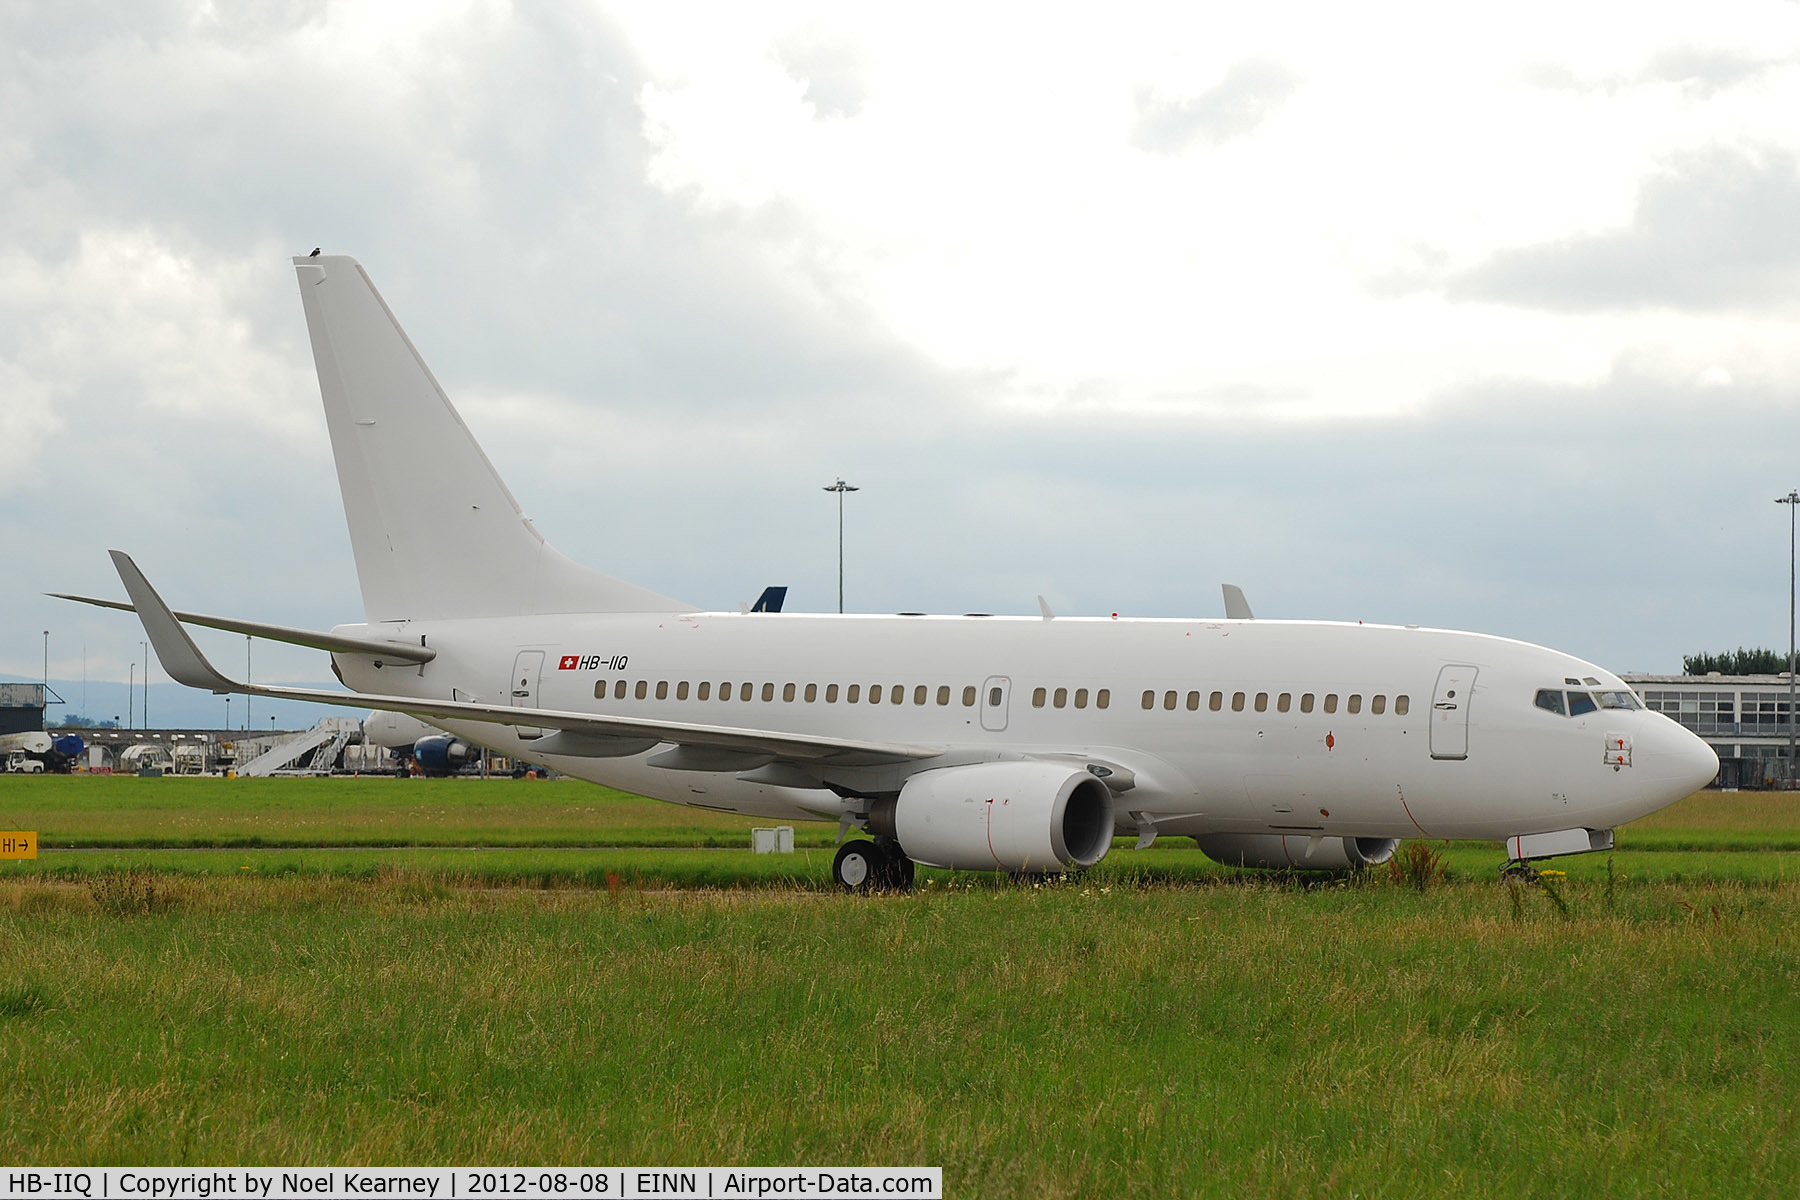 HB-IIQ, 1999 Boeing 737-7CN BBJ C/N 30752, Photographed at Shannon Airport awaiting maintenance.